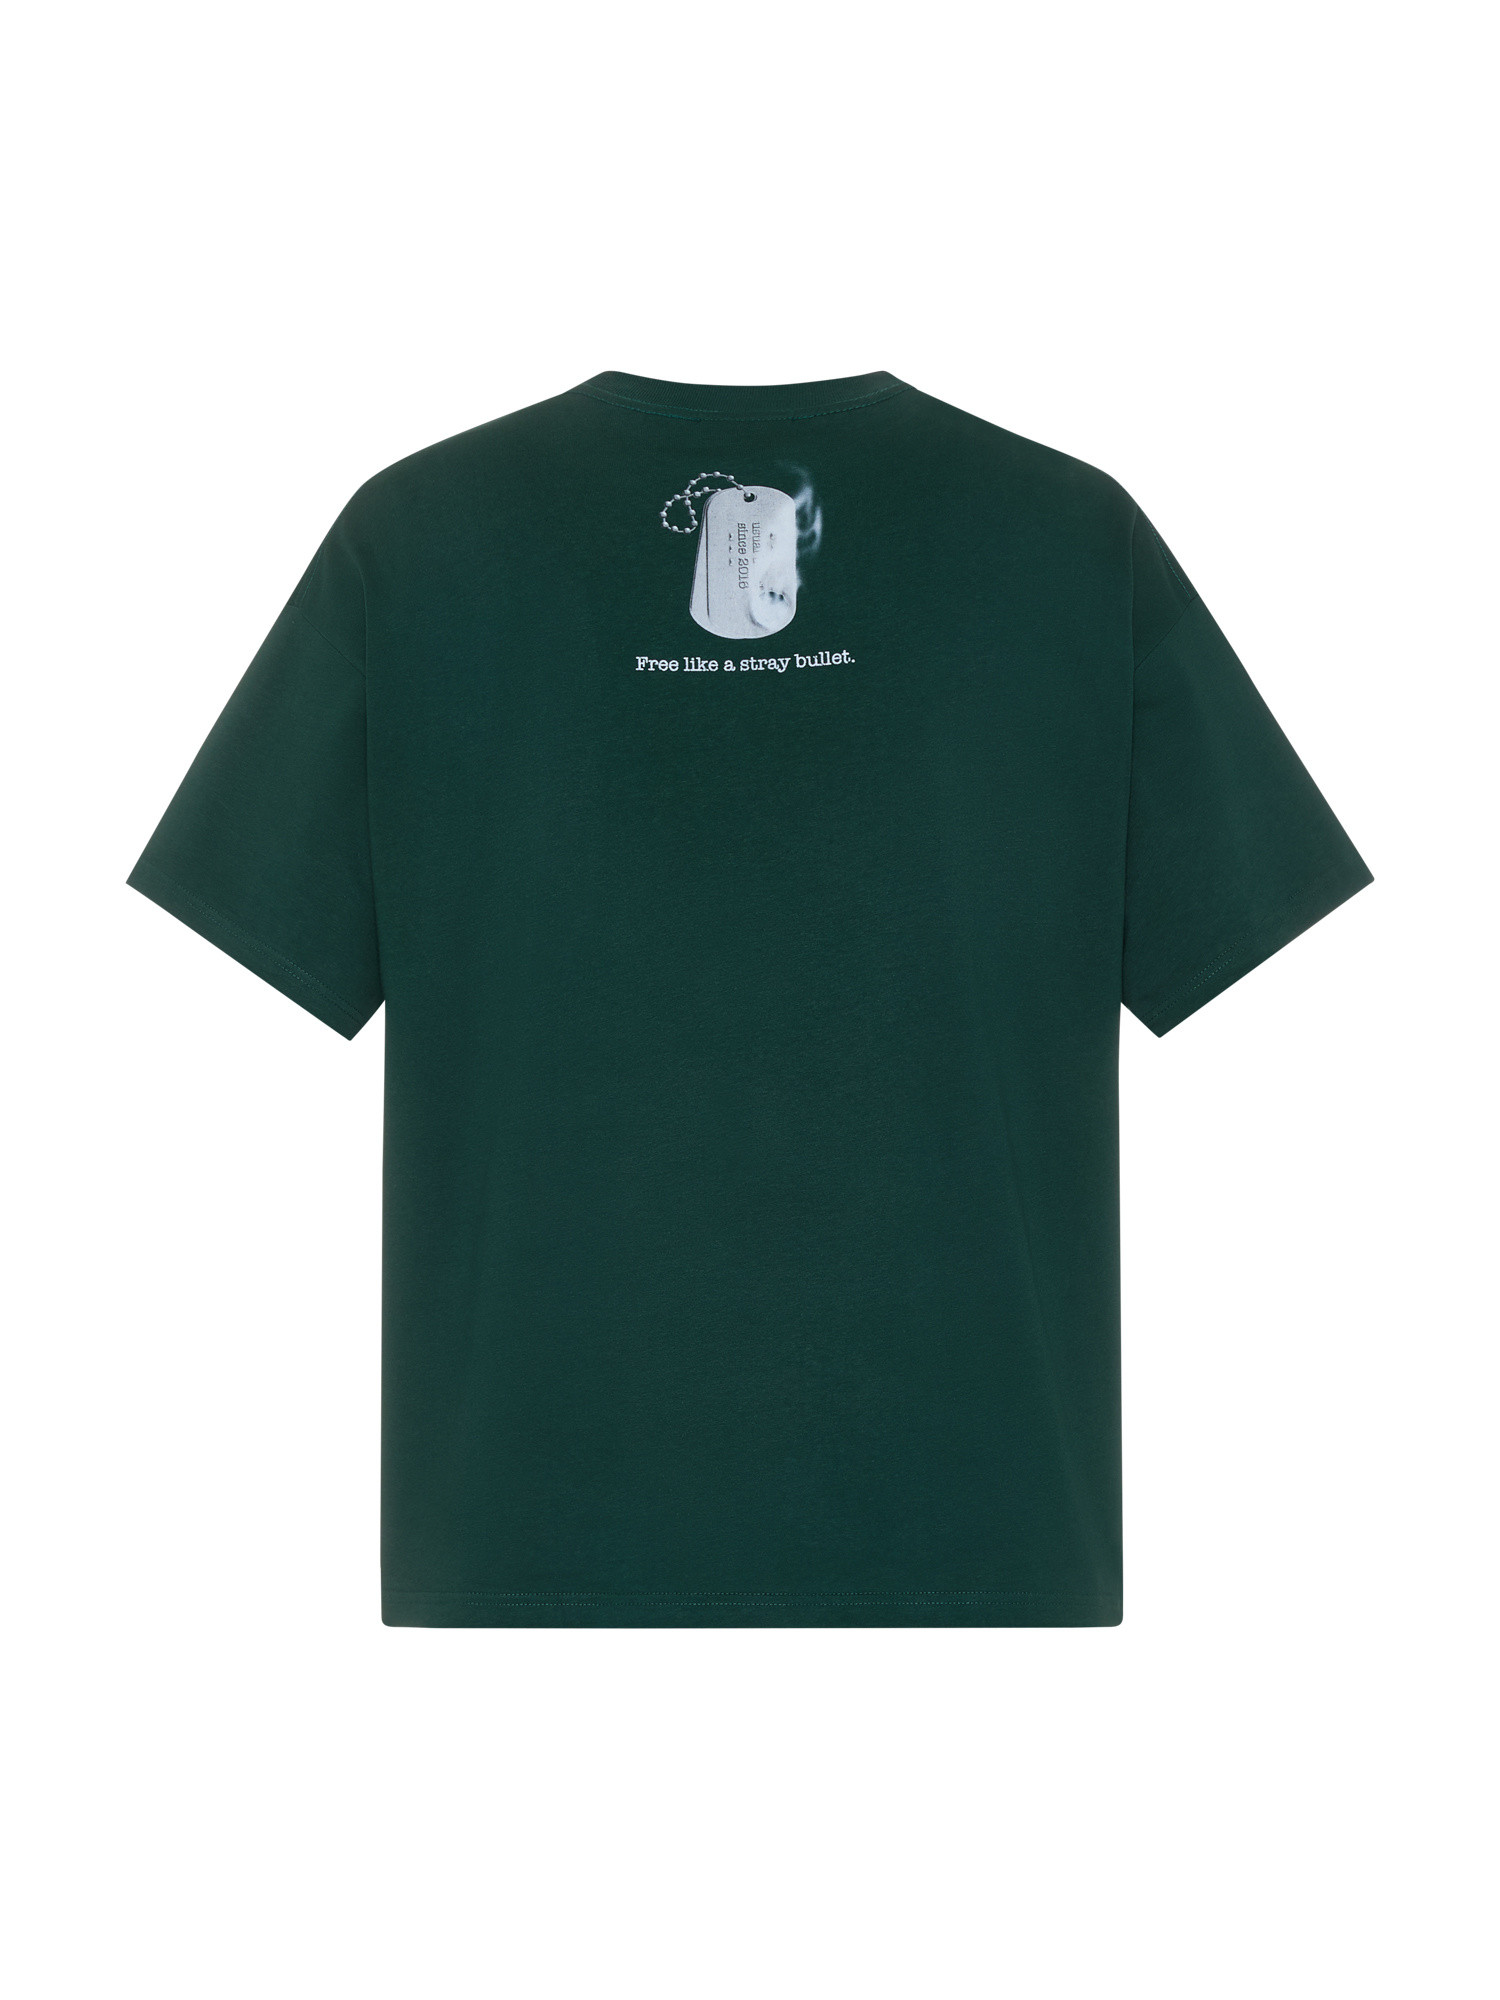 Usual - T-Shirt manica corta Bullet, Verde, large image number 1